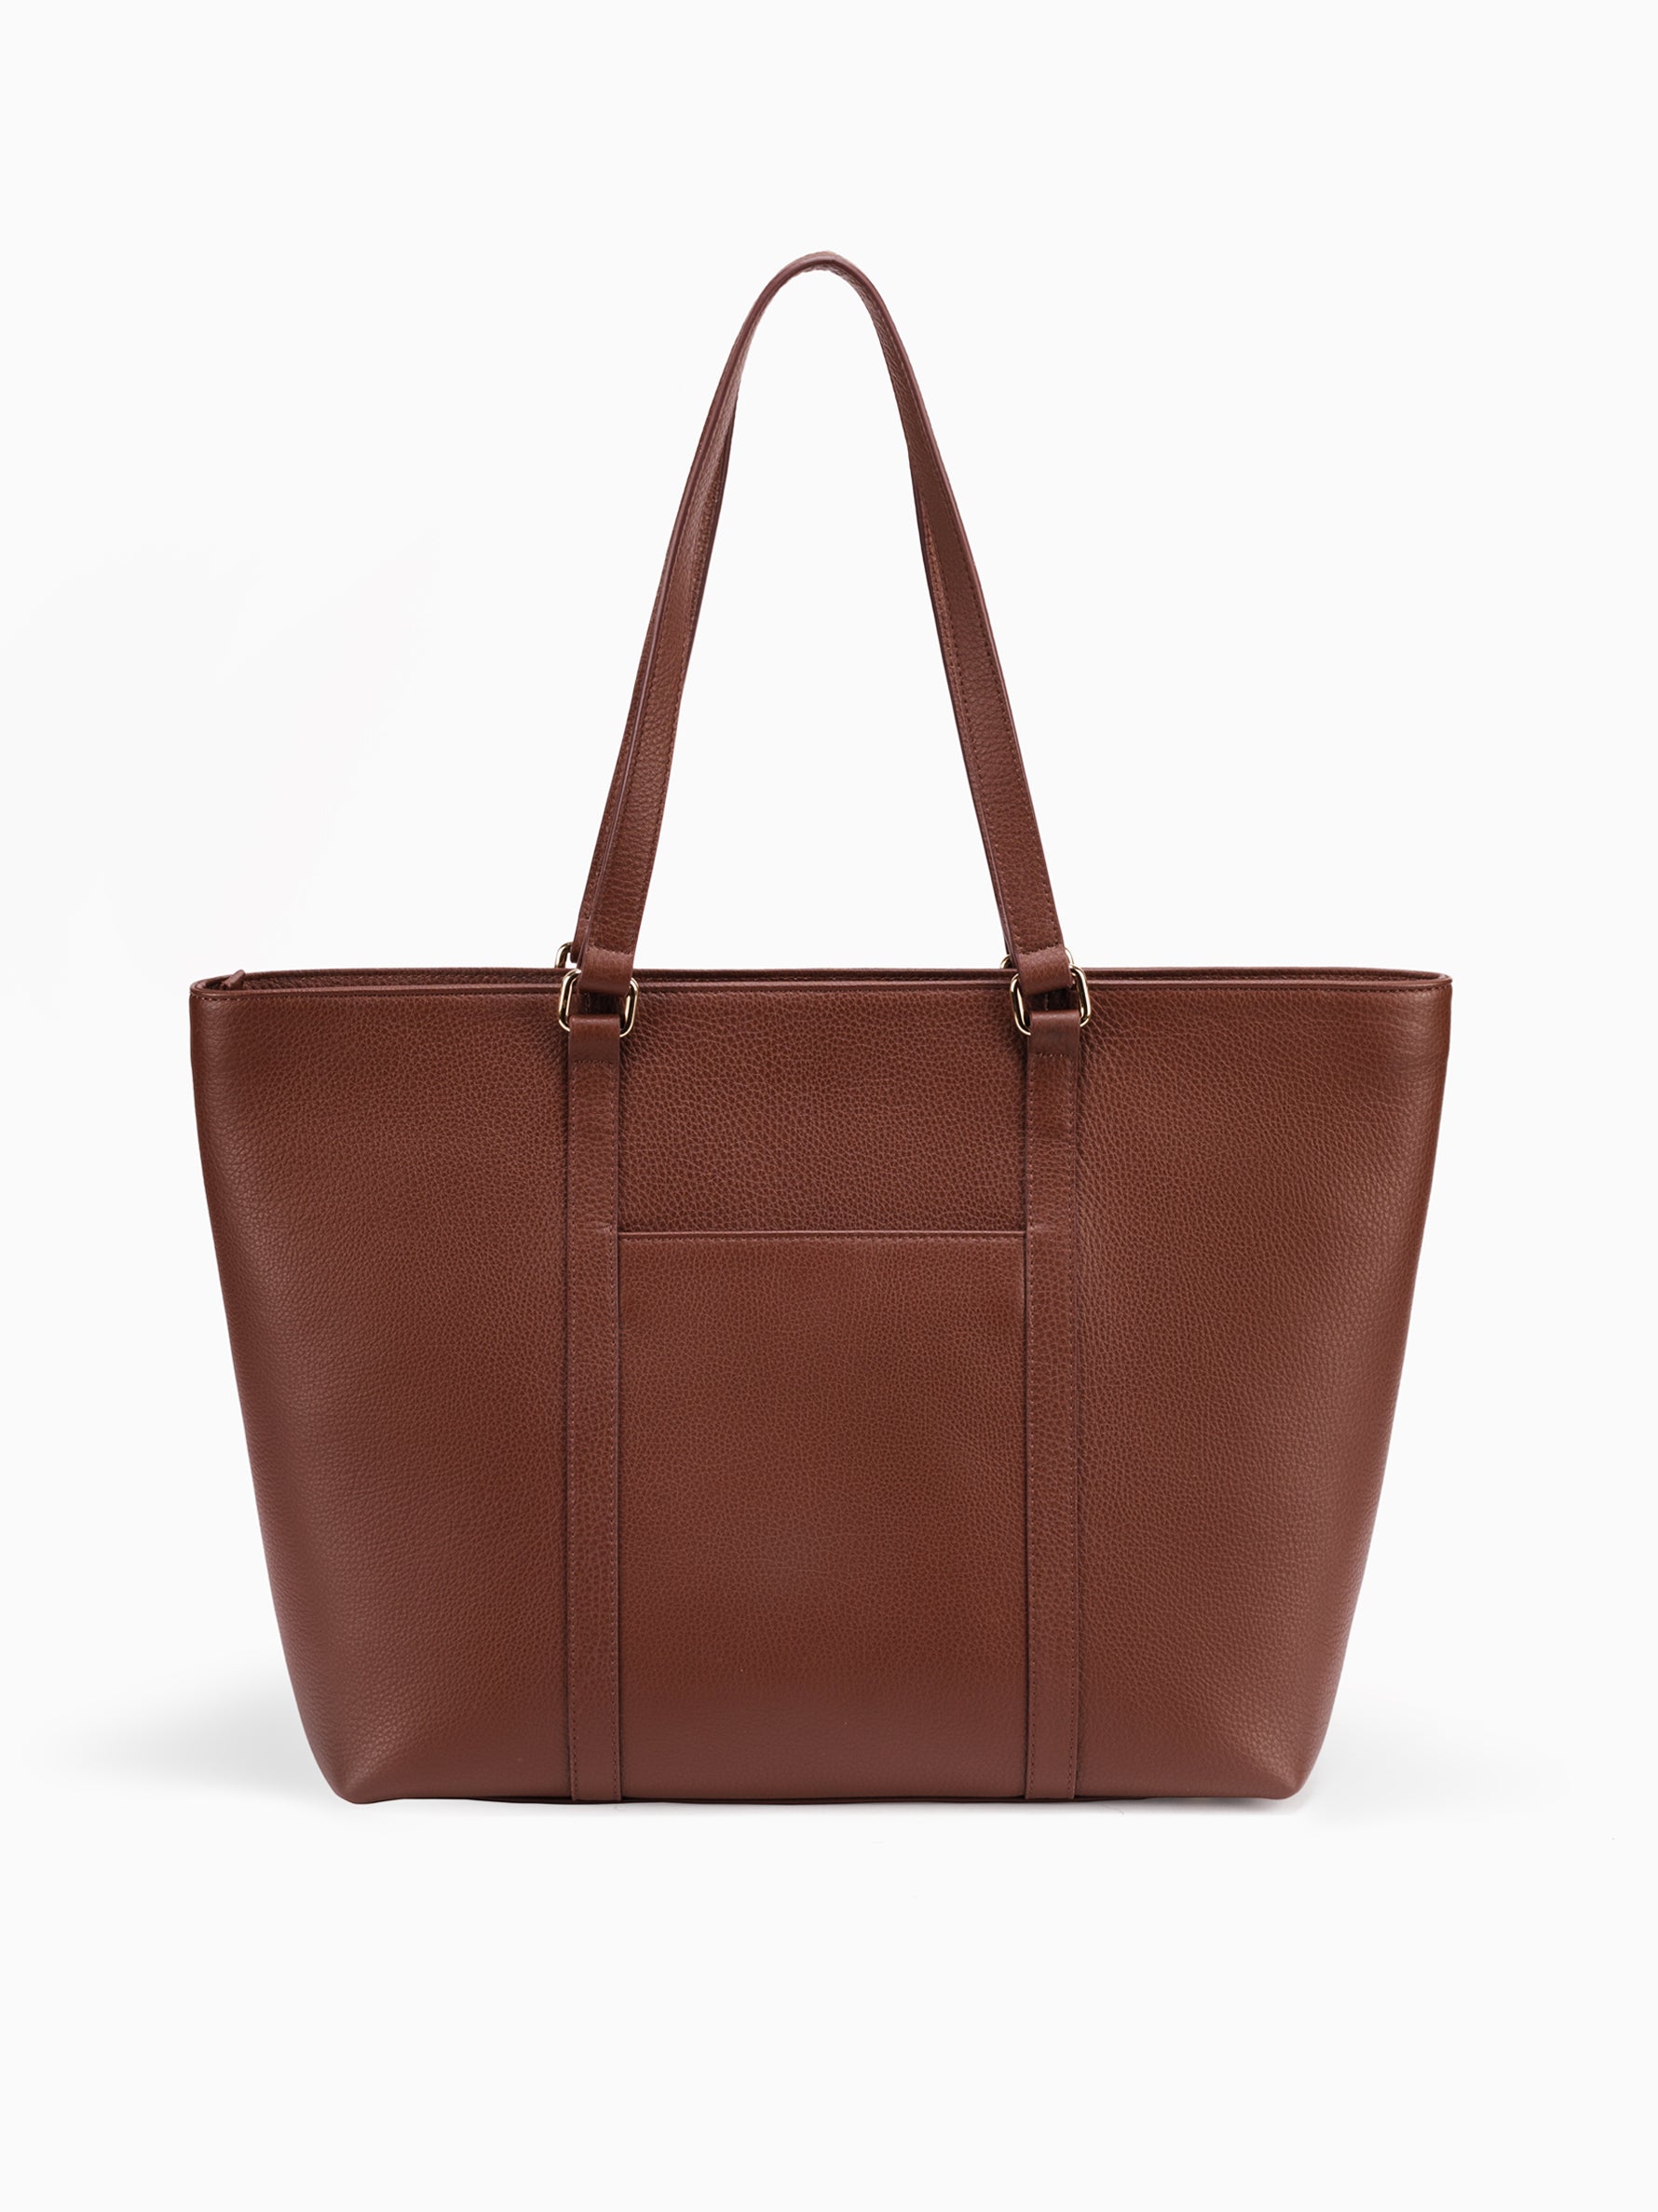 Handcrafted genuine leather office tote bag for women Espresso Brown